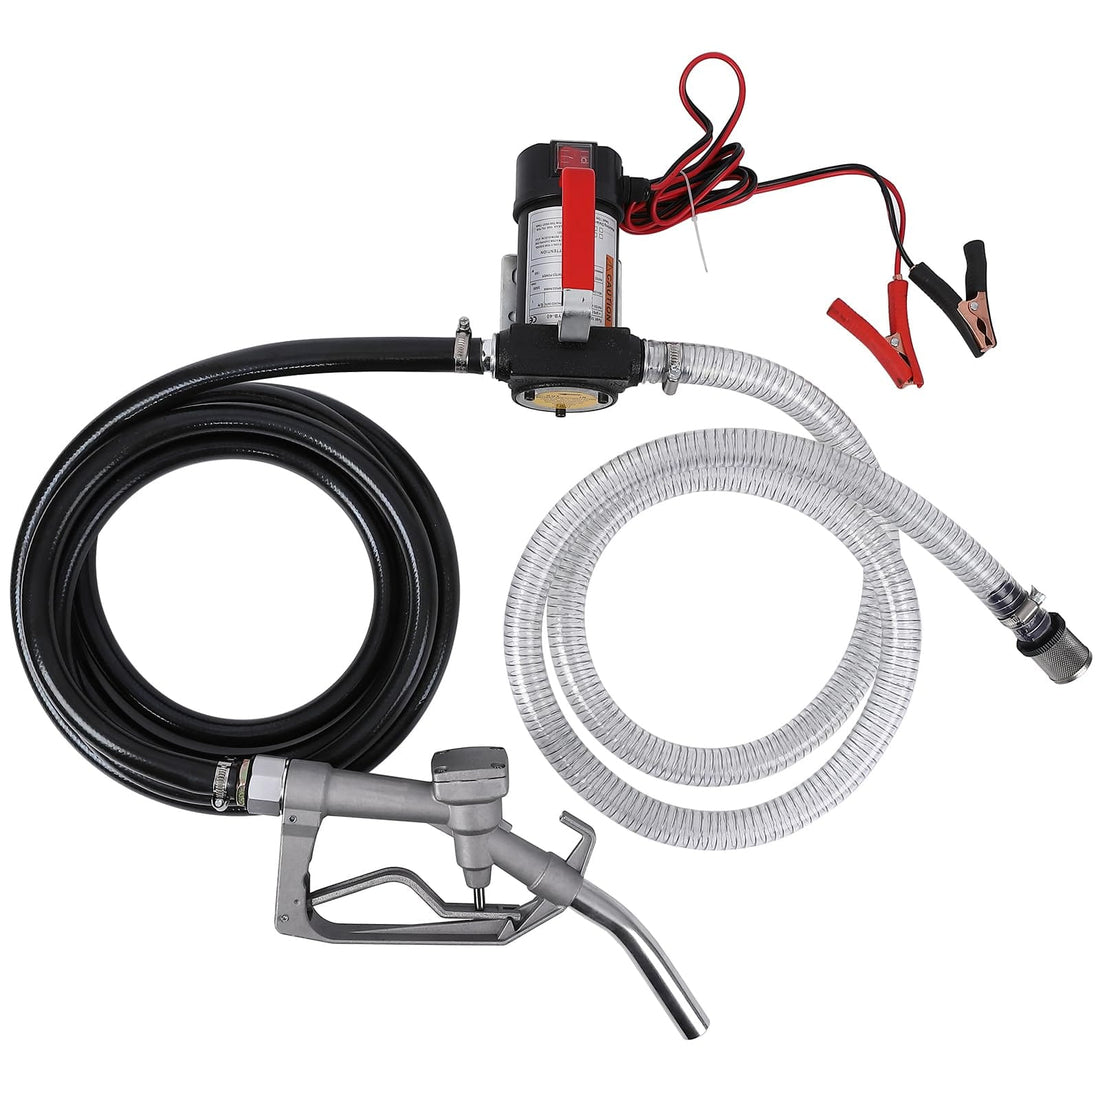 Fuel Transfer Pump Kit 10GPM/40LPM Electric Self-Priming DC 12V Includes Alligator Clamps